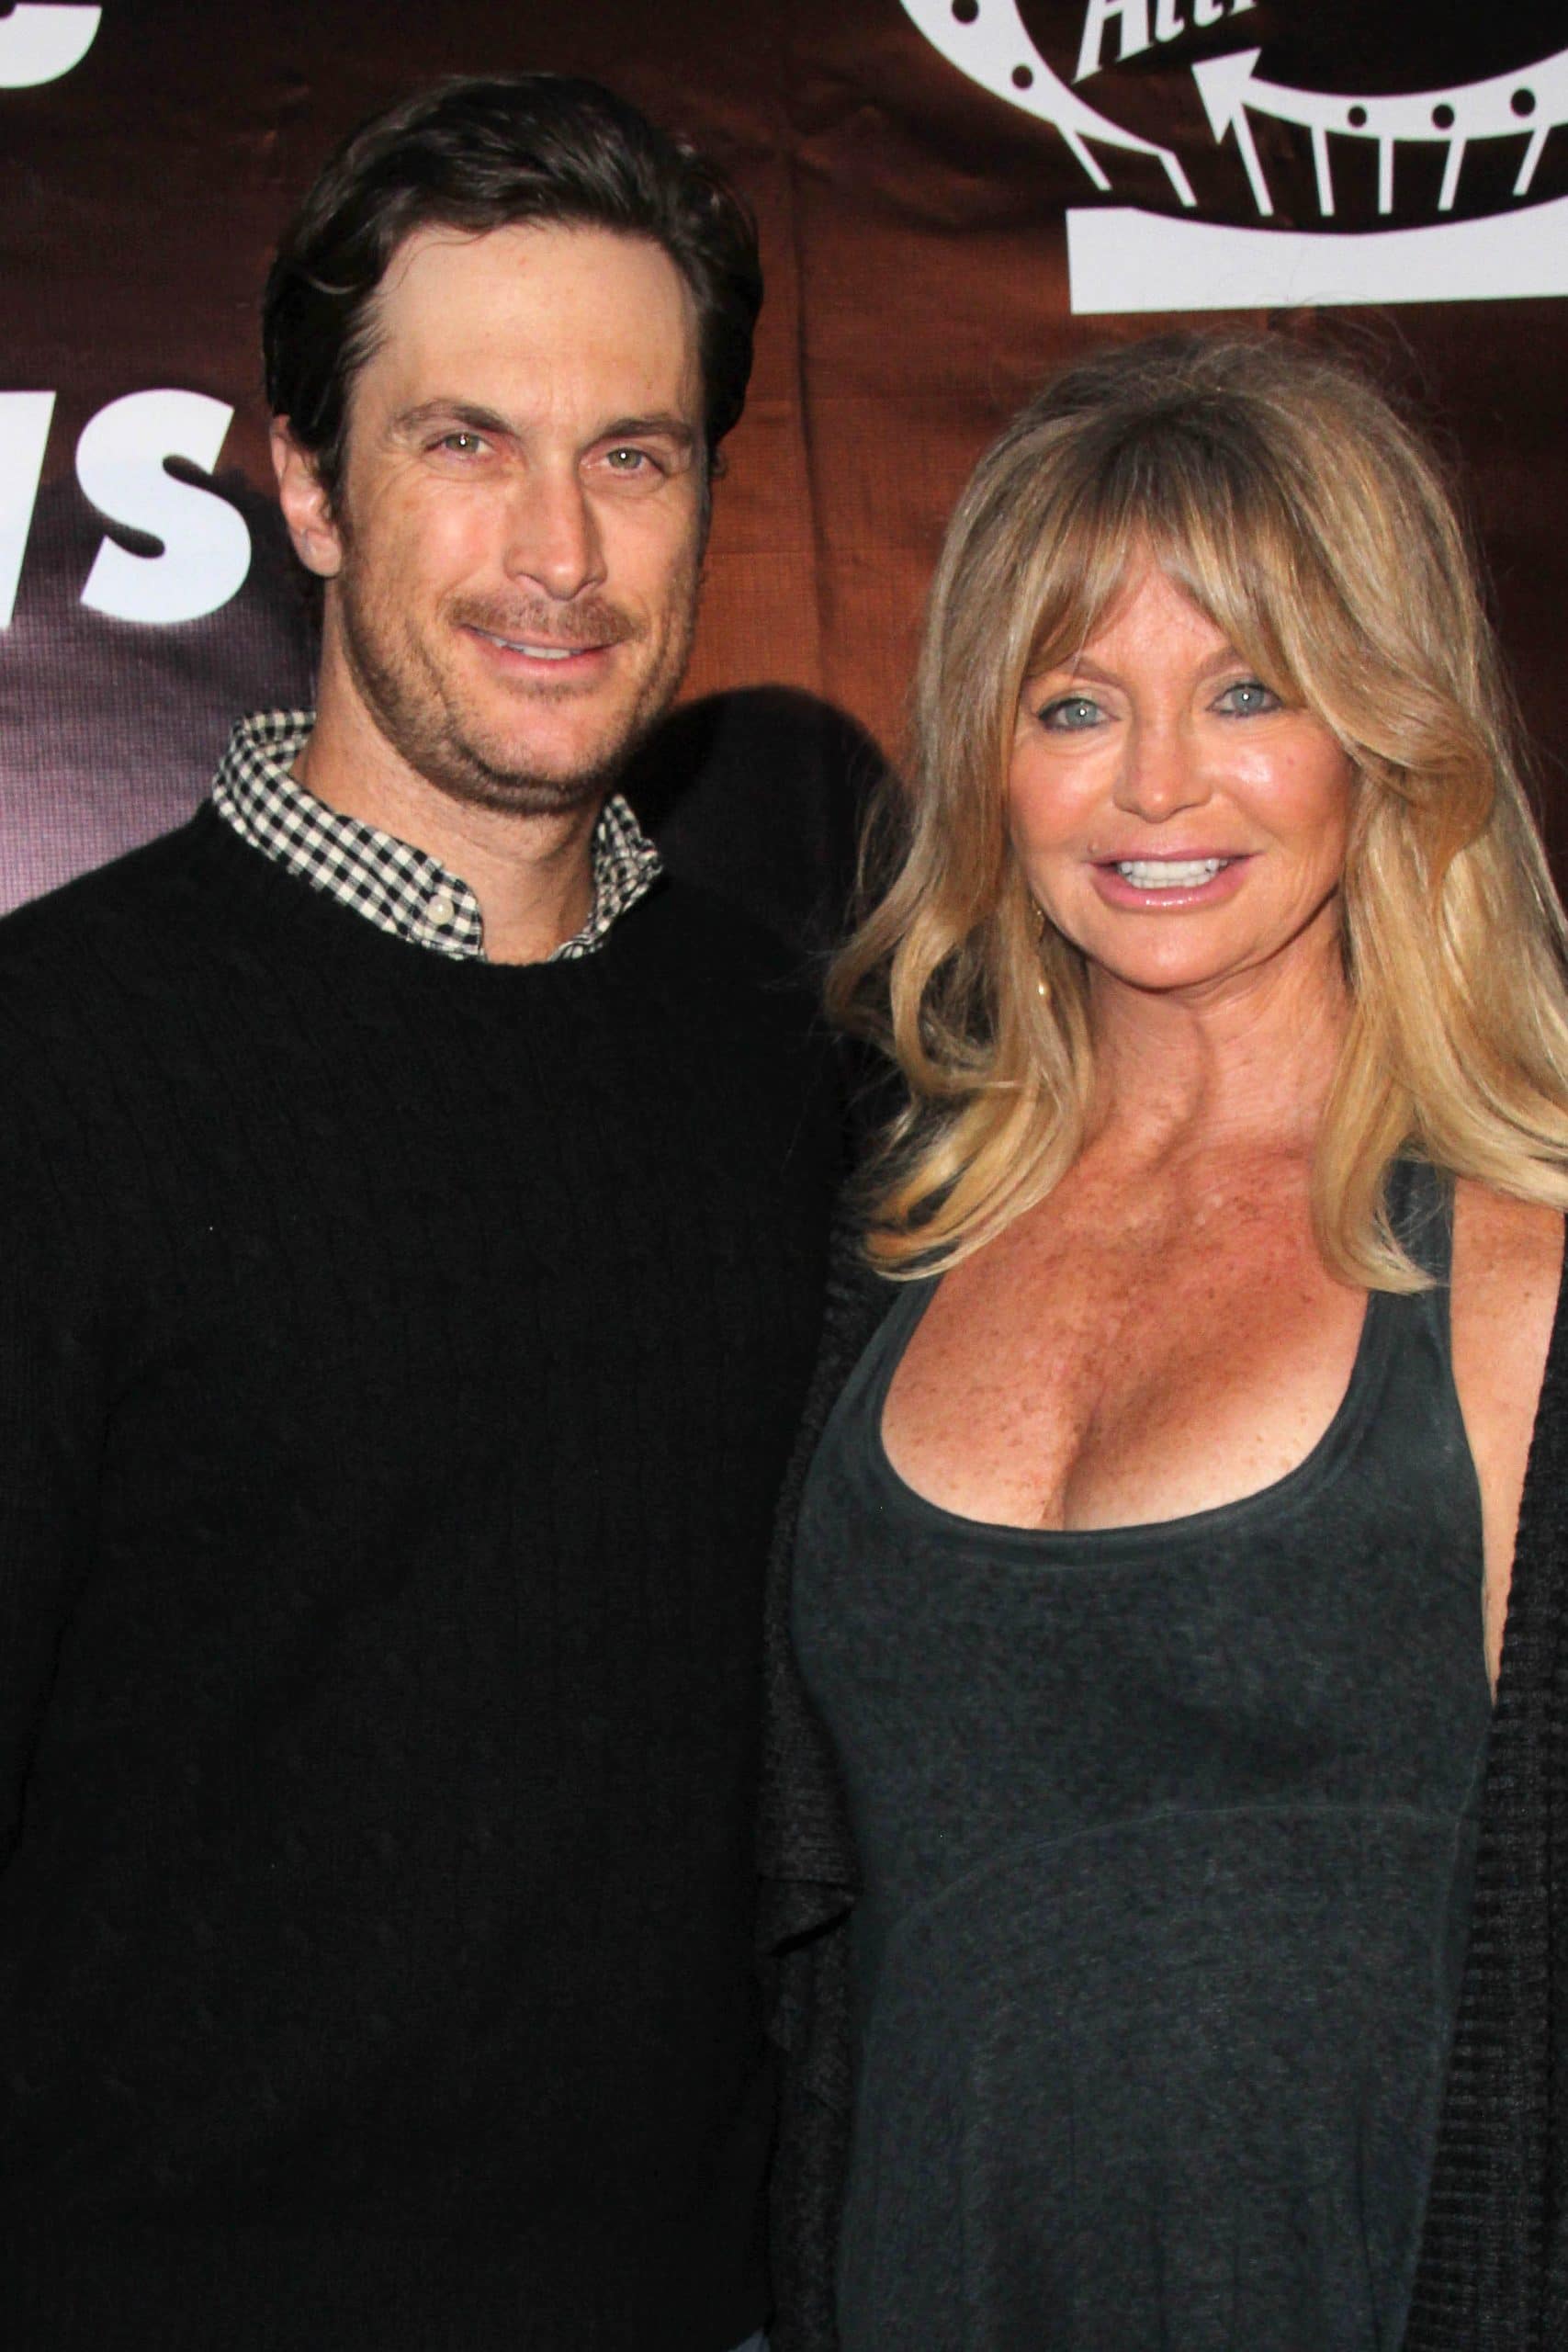 Goldie Hawn Gets Emotional Singing To Son, Oliver Hudson, On His Birthday In New Video